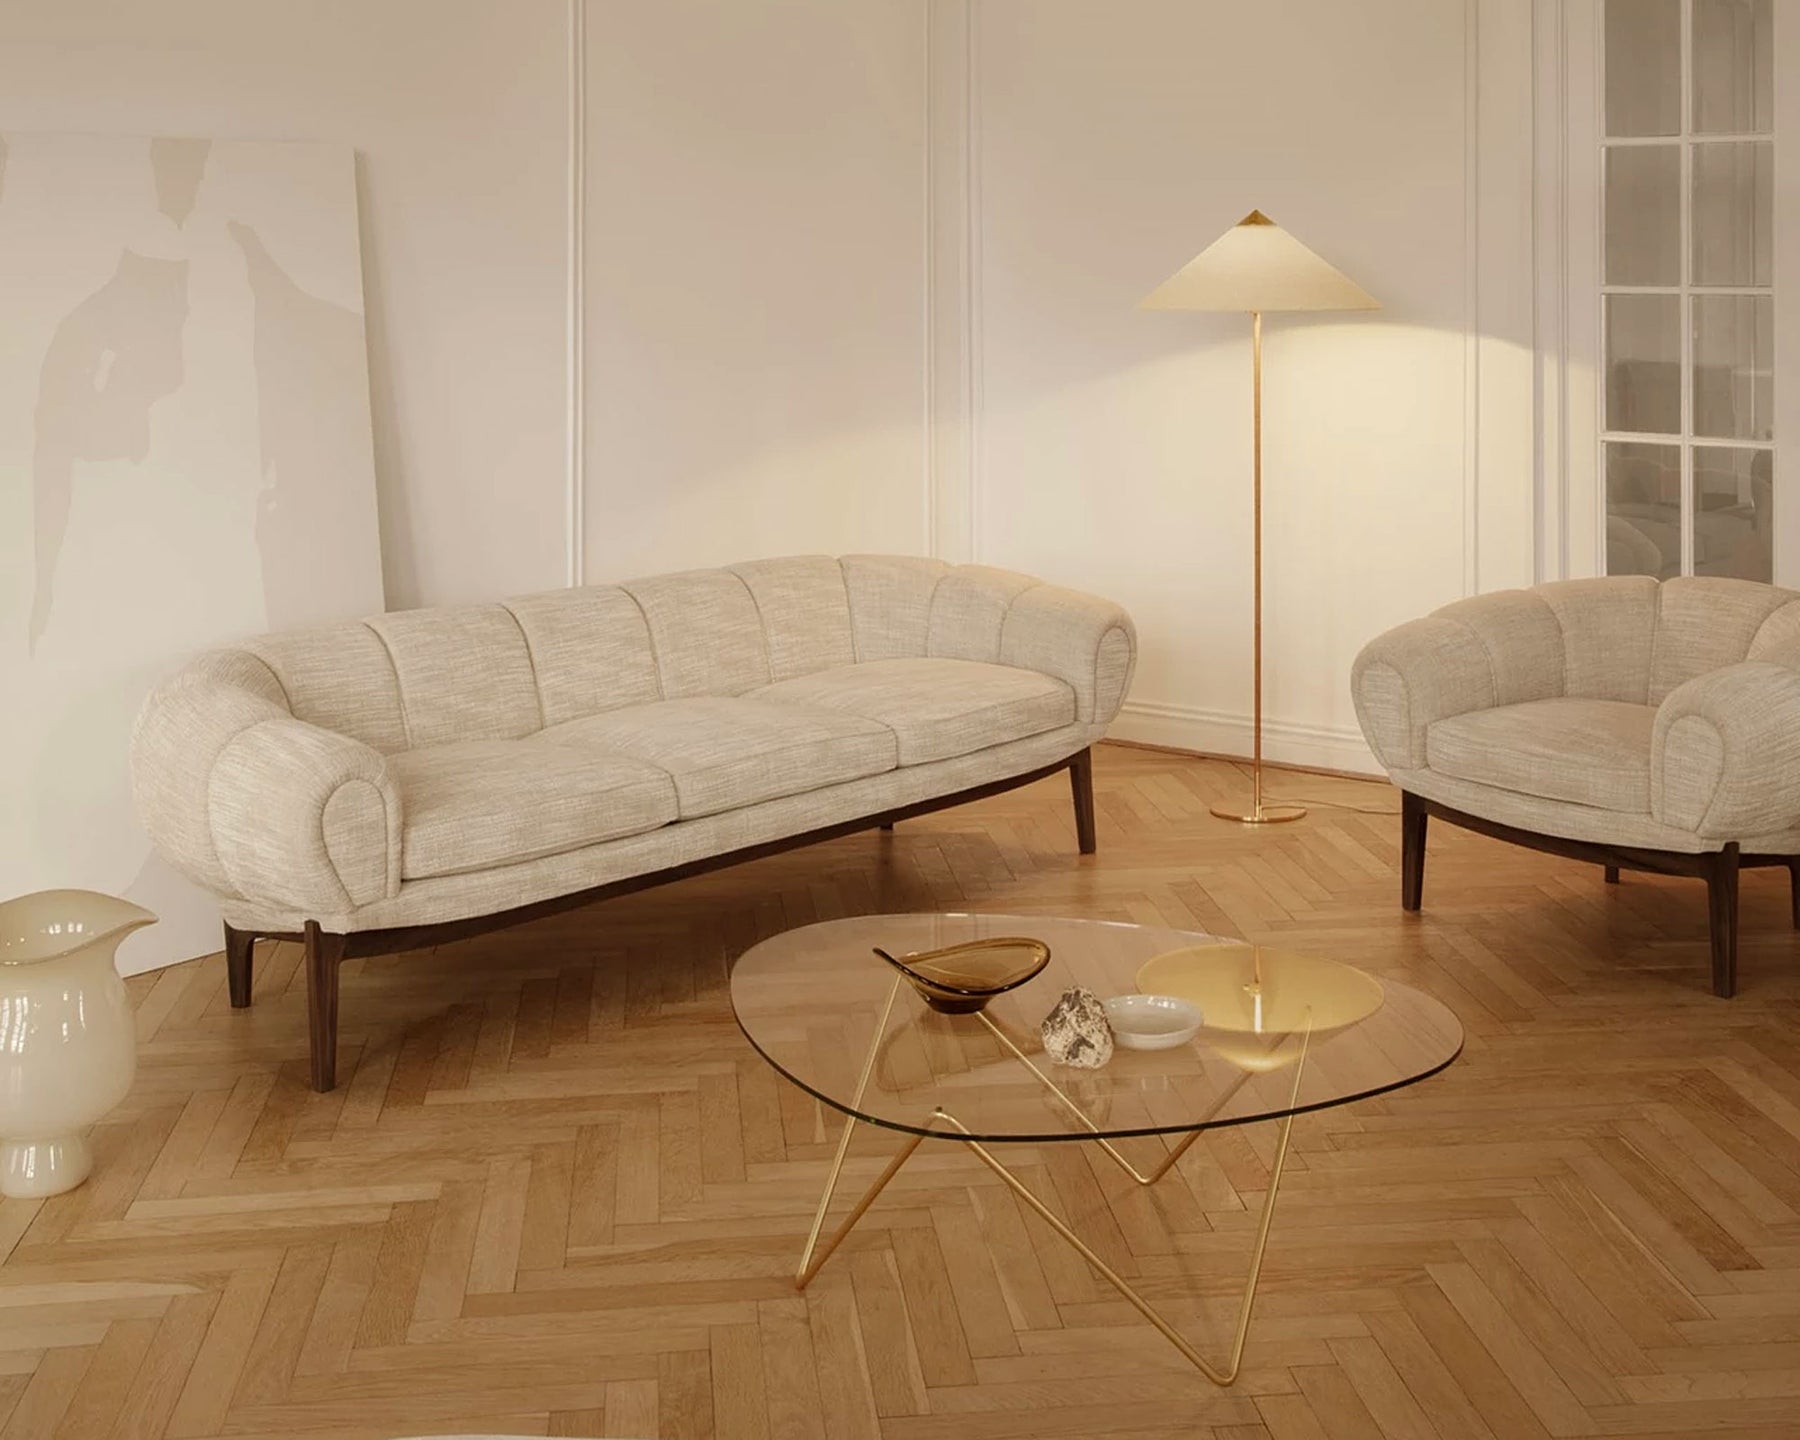 Oval Glass Coffee Table | DSHOP